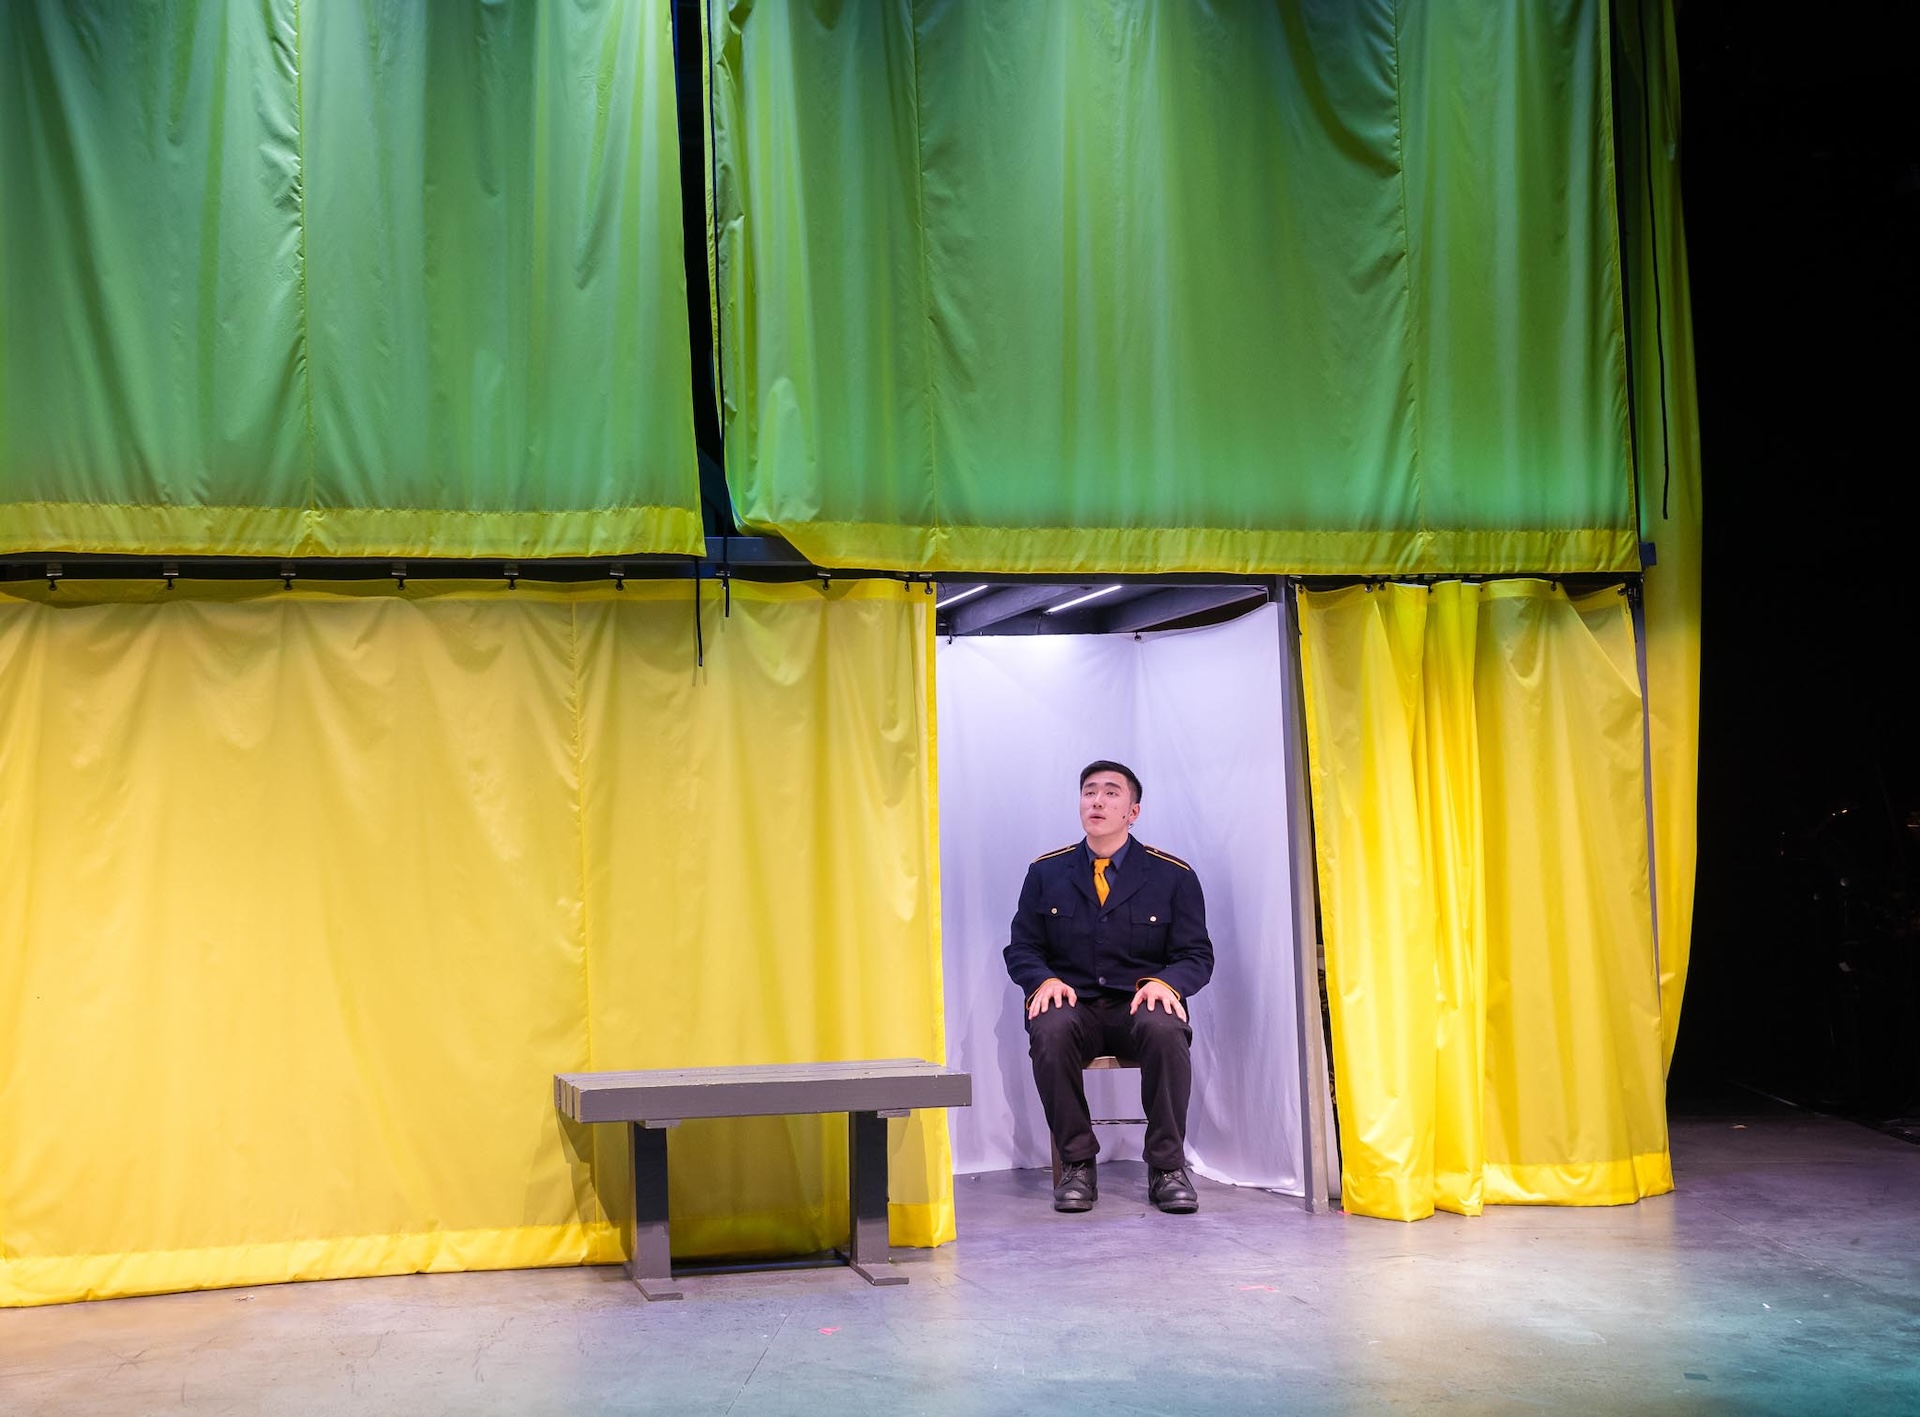 actor sitting in alcove with yellow and green draped curtains surrounding